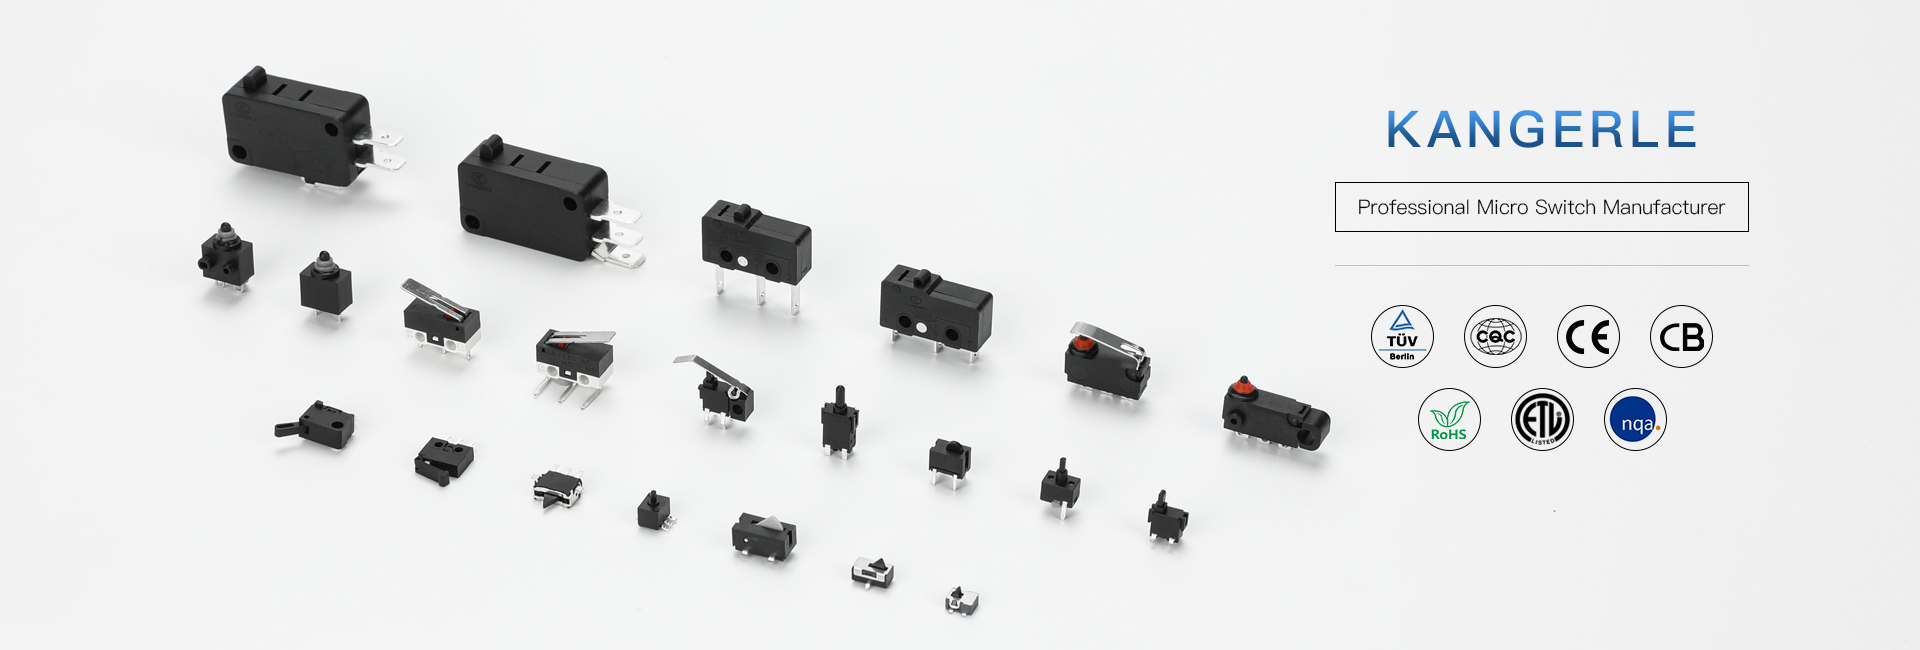 How many micro switch types are there？